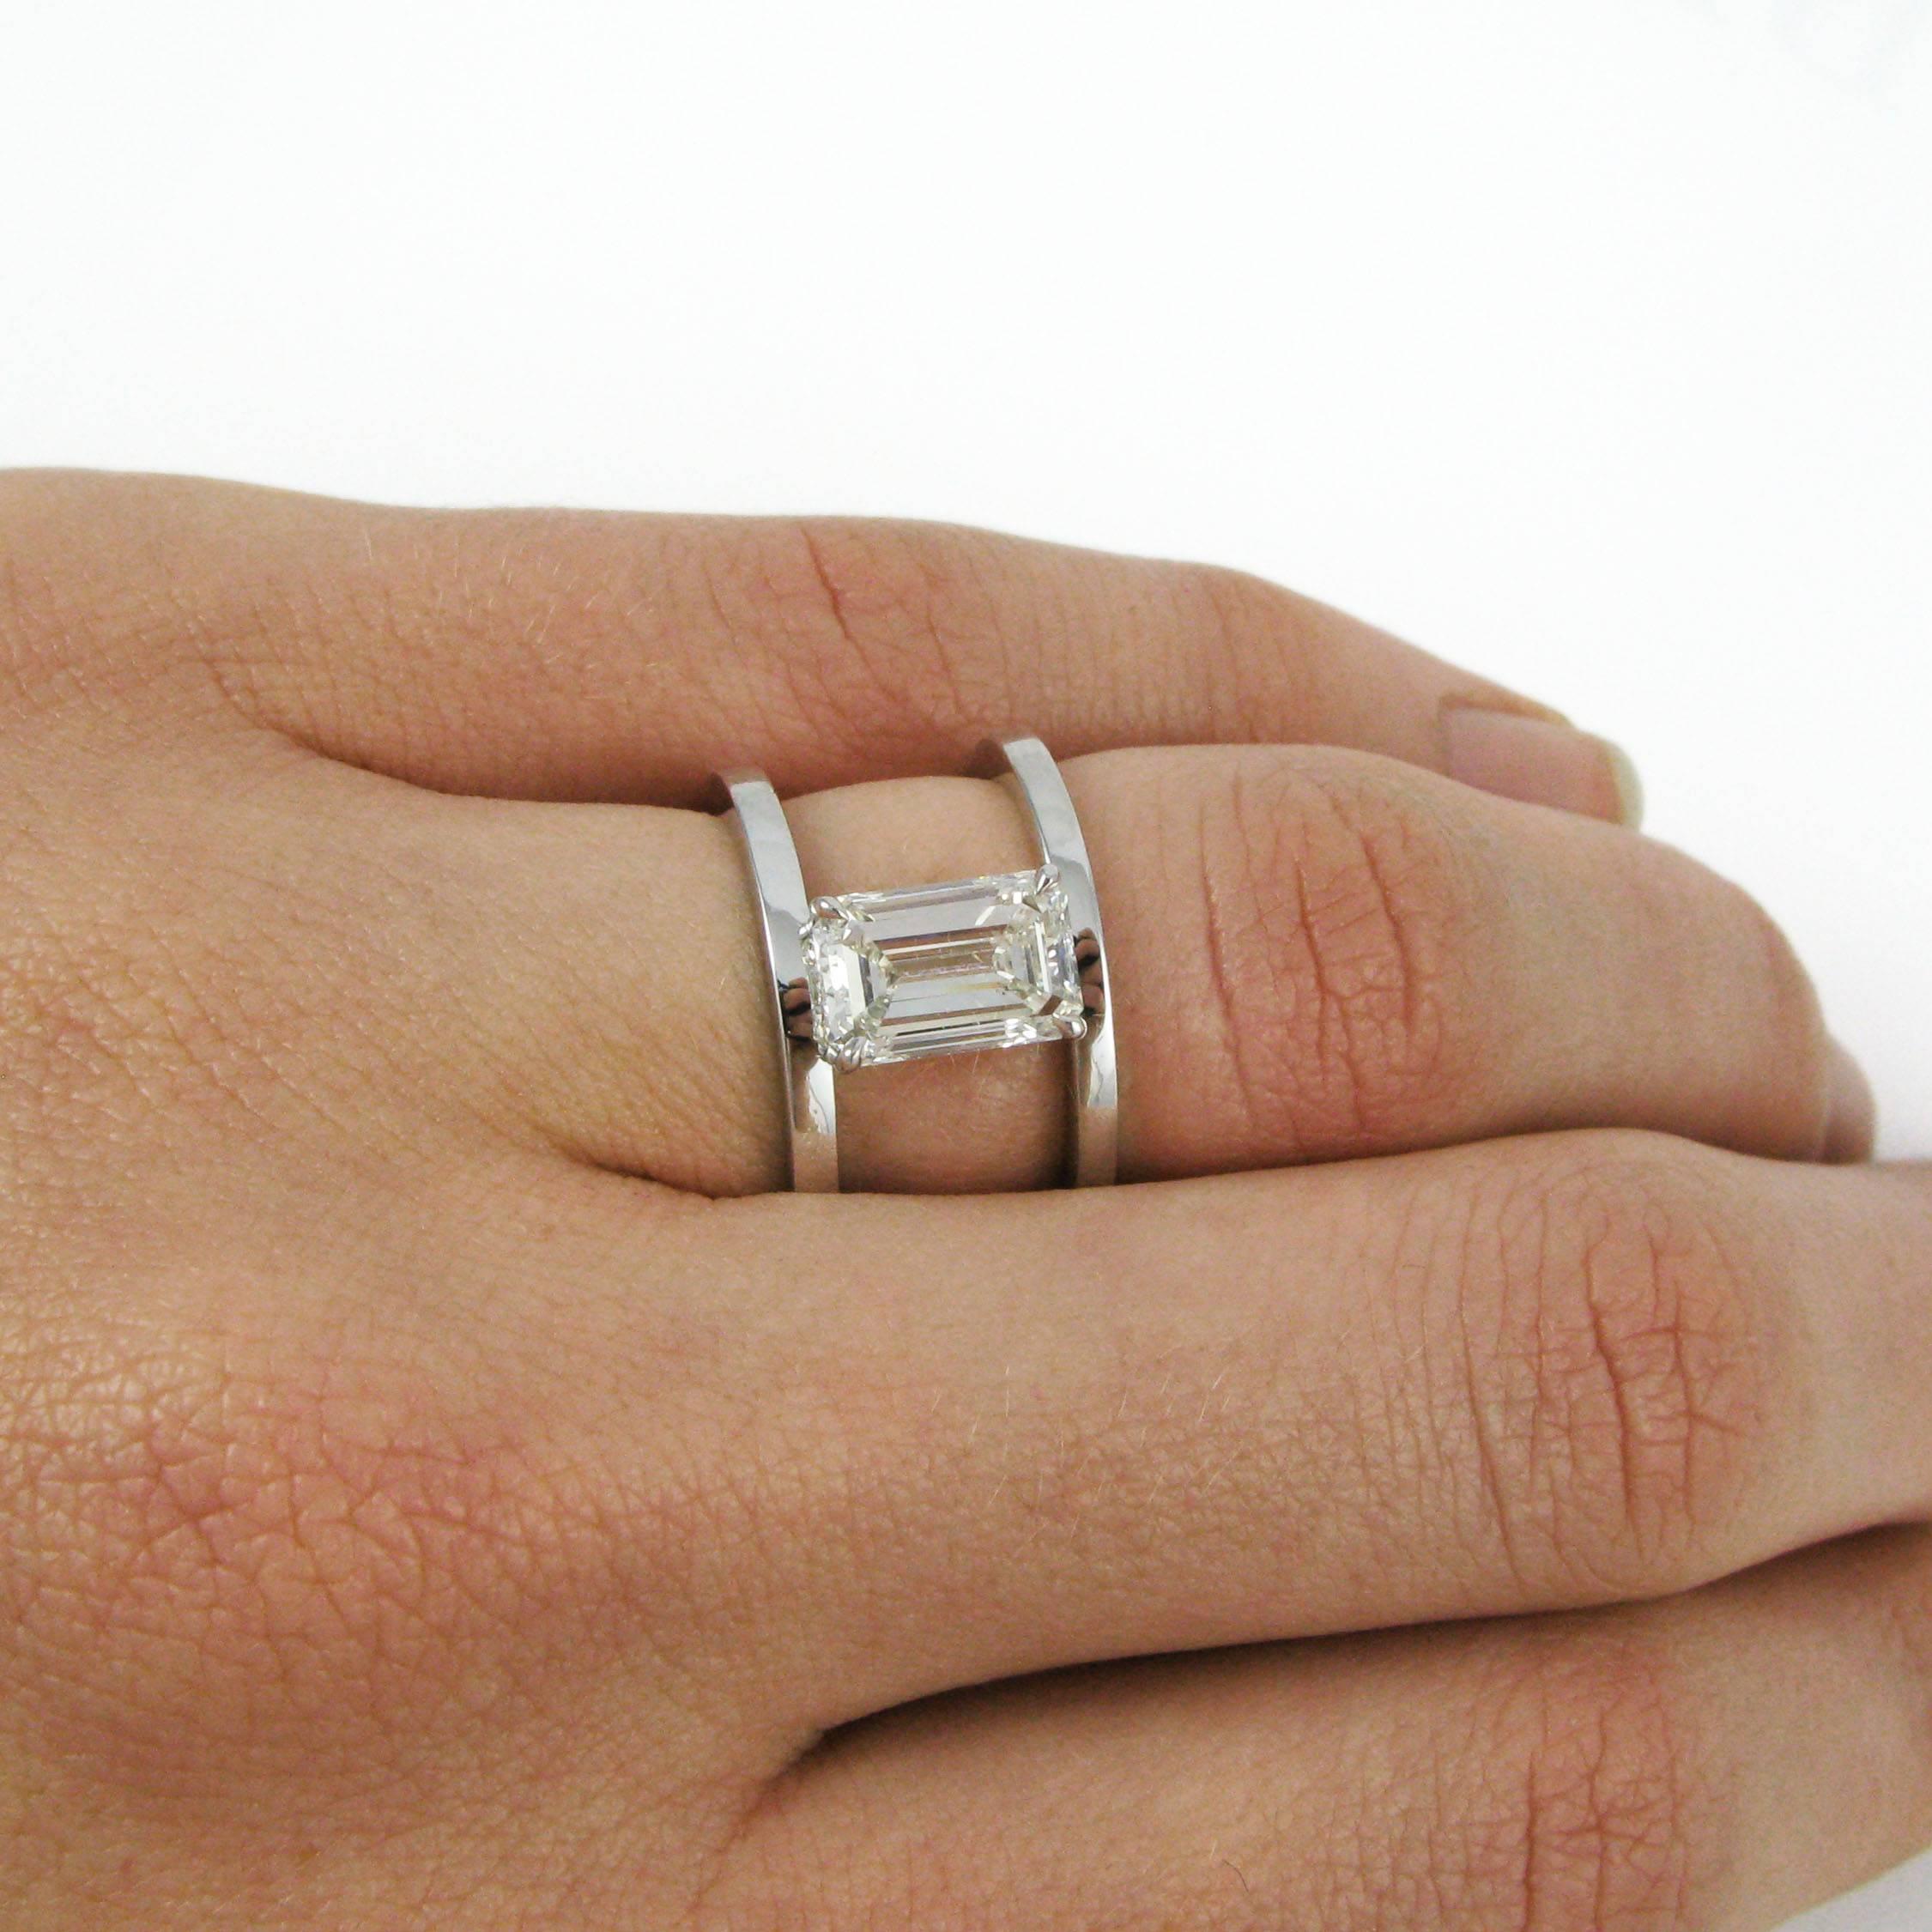 A one-of-a-kind style! This unique platinum ring centers on a 2.09 carat emerald-cut diamond prong set and suspended between two parallel bands. A simple design that packs quite a punch!

Purchase includes GIA Diamond Grading Report 15280760,